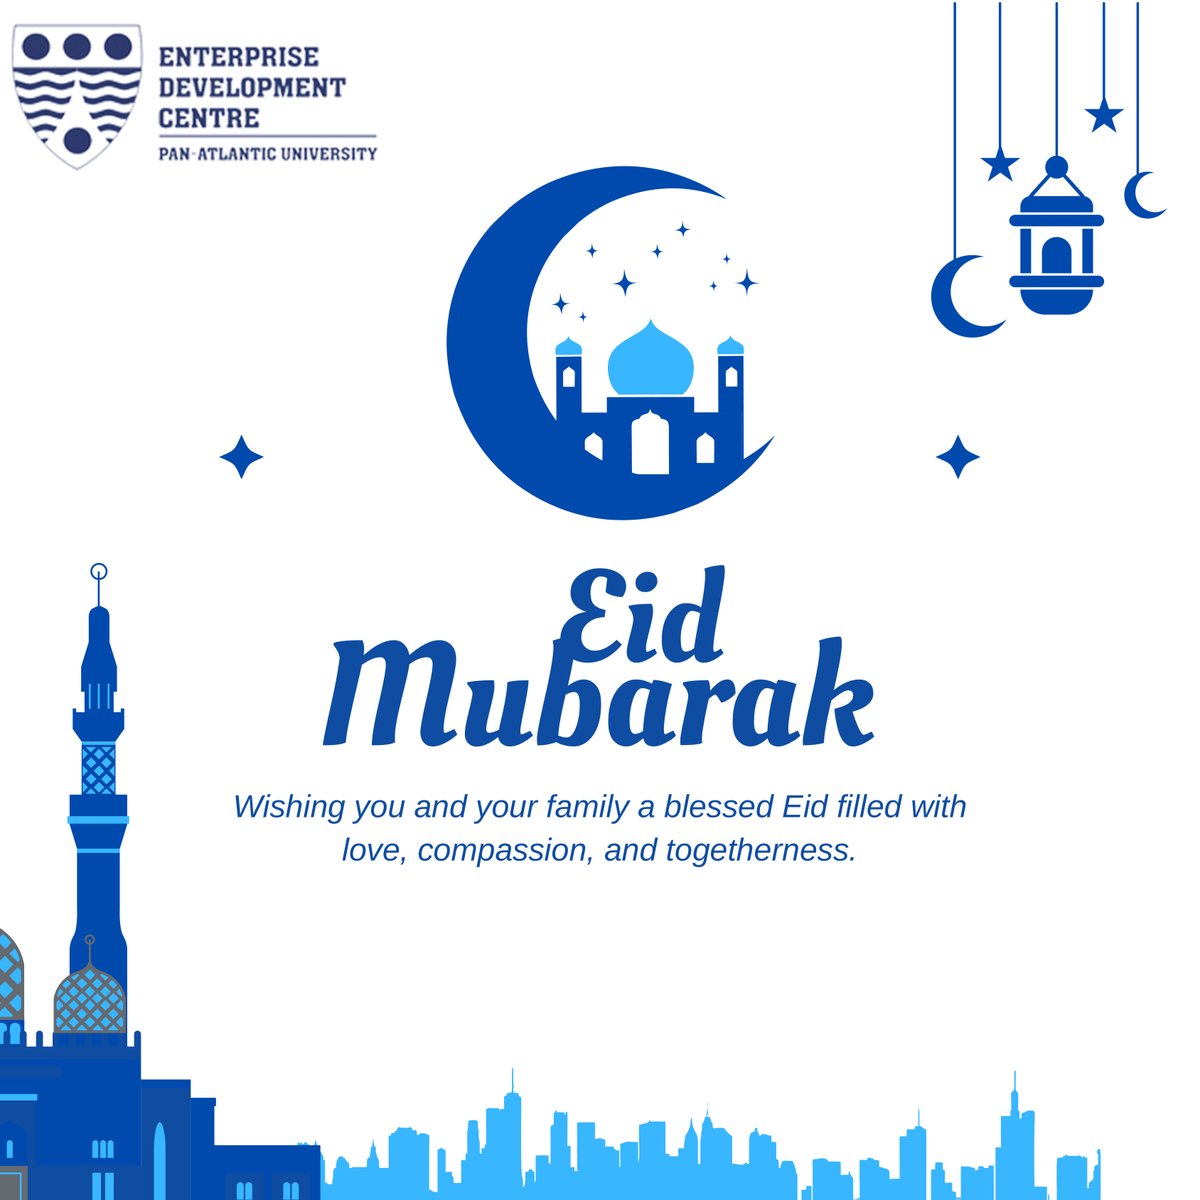 Wishing you and your family a blessed Eid filled with love, compassion, and togetherness. 🌟 Happy Eid Mubarak from all of us at Enterprise Development Centre.🌙 #togetherwecelebrate #EidMubarak #EidUlFitr #Blessings #Love #Compassion #Togetherness #Family #Community